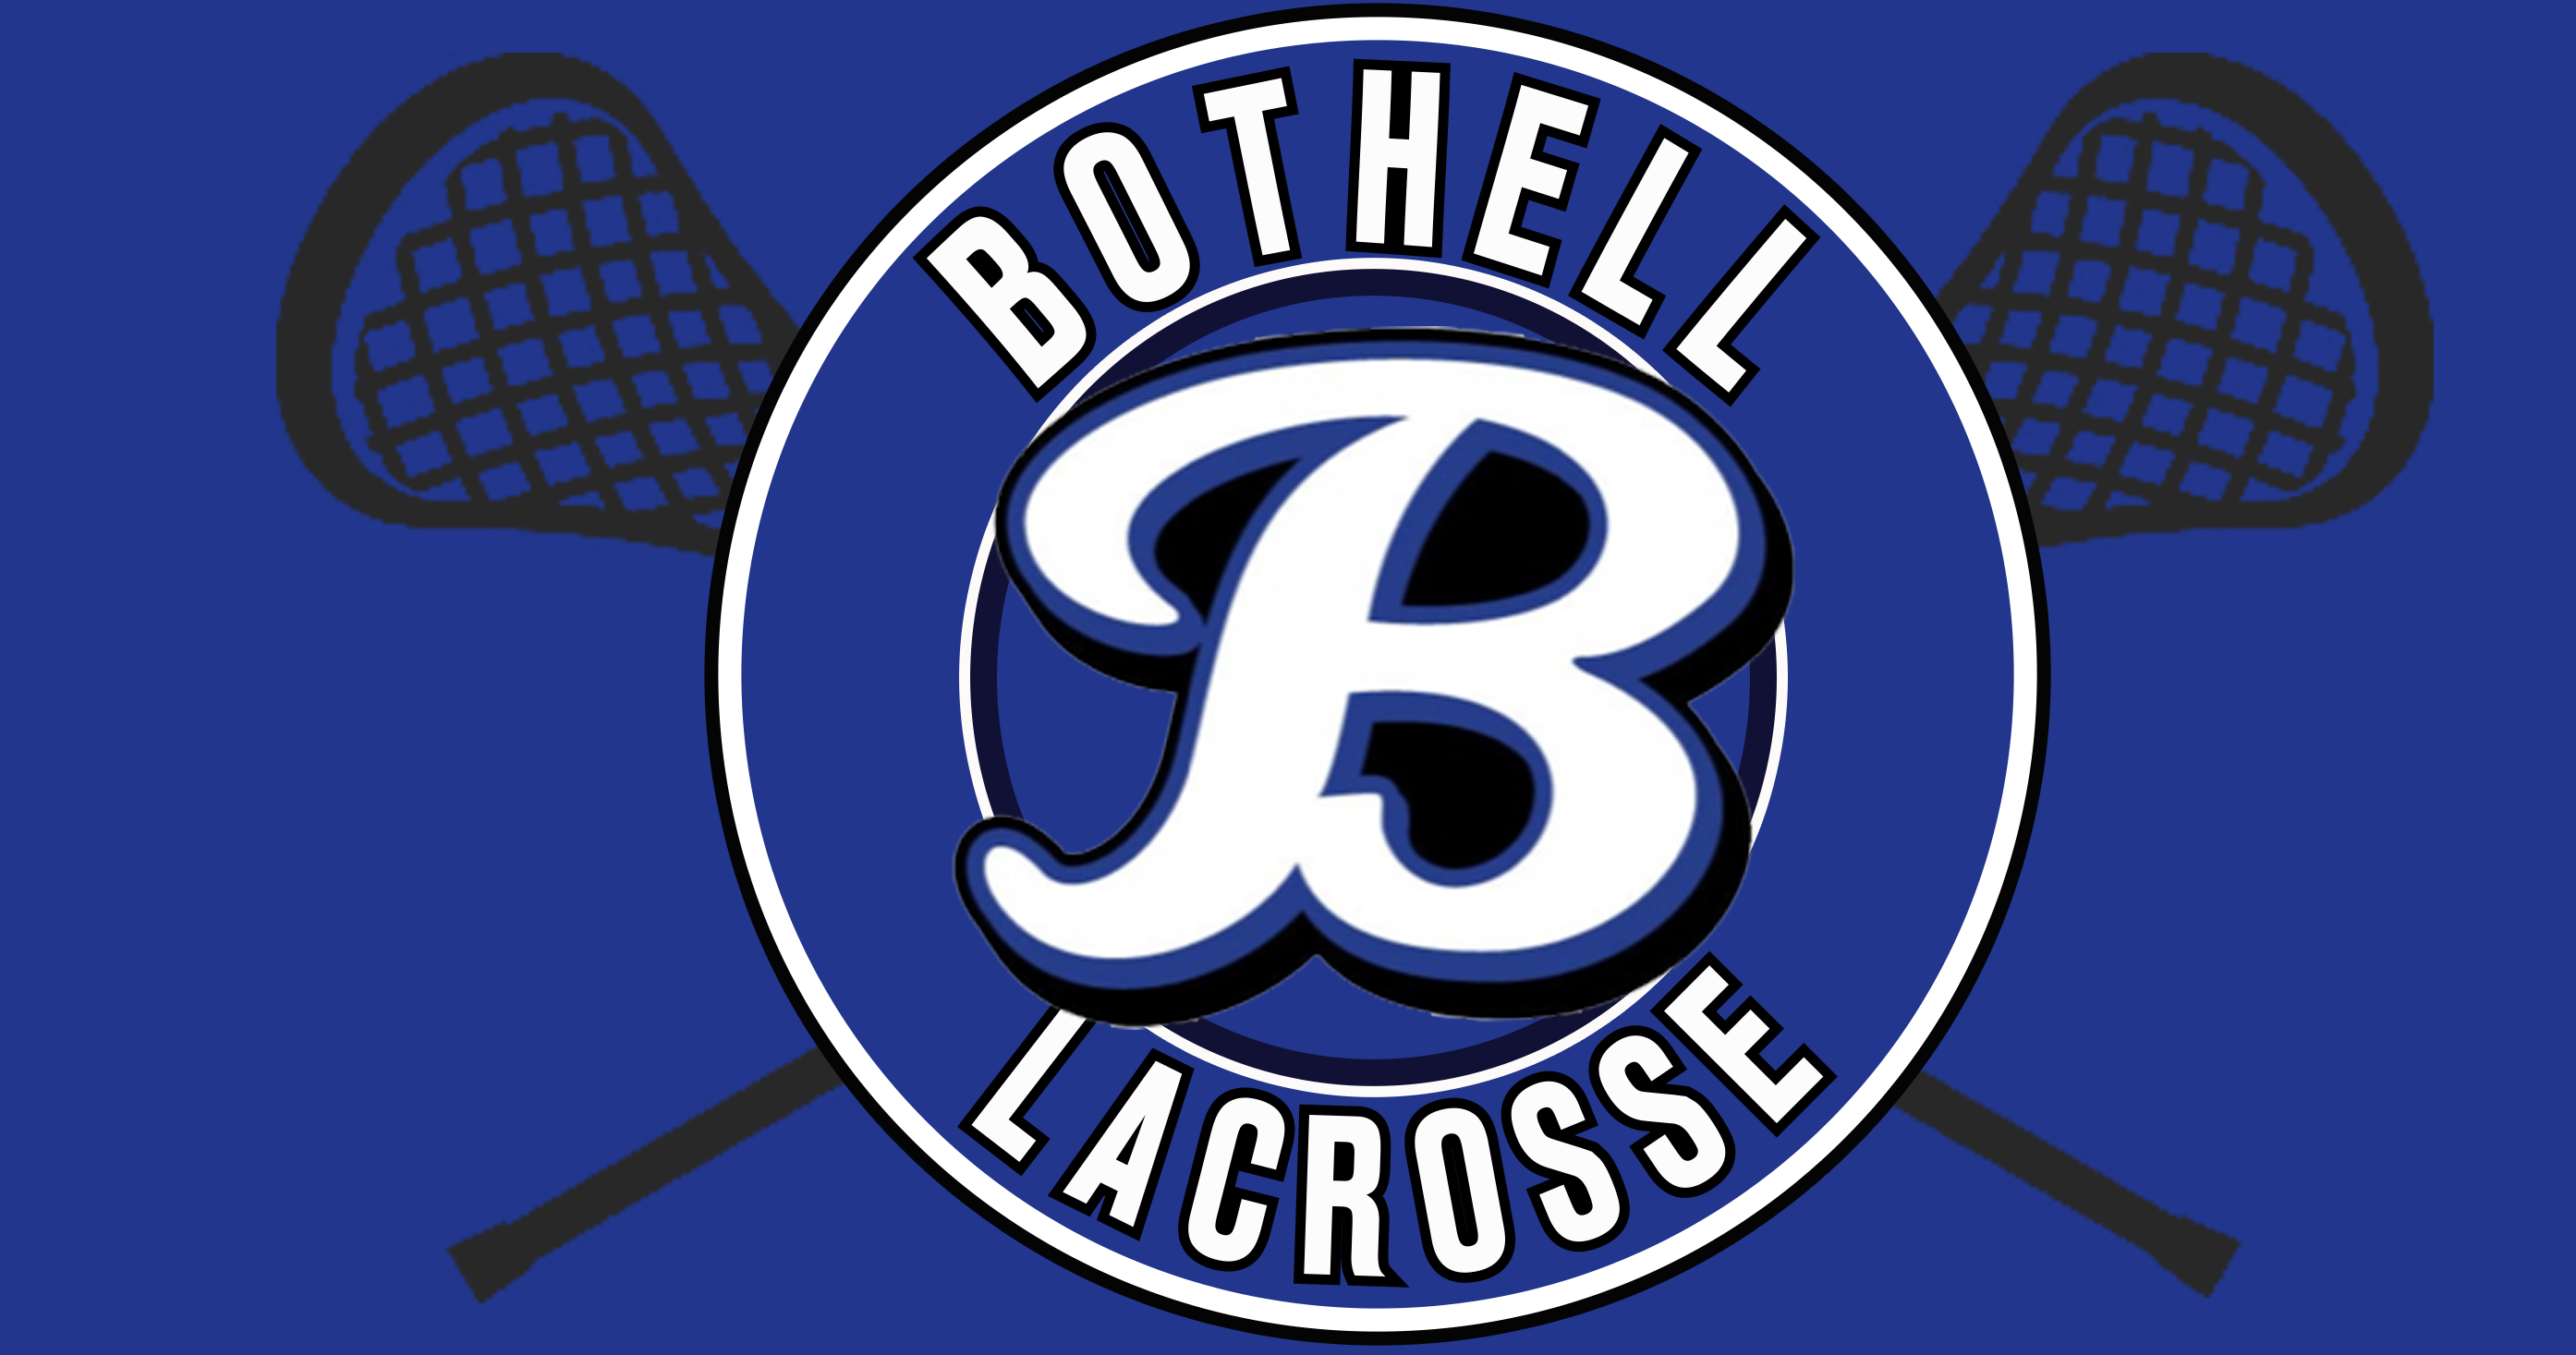 Bothell Lacrosse